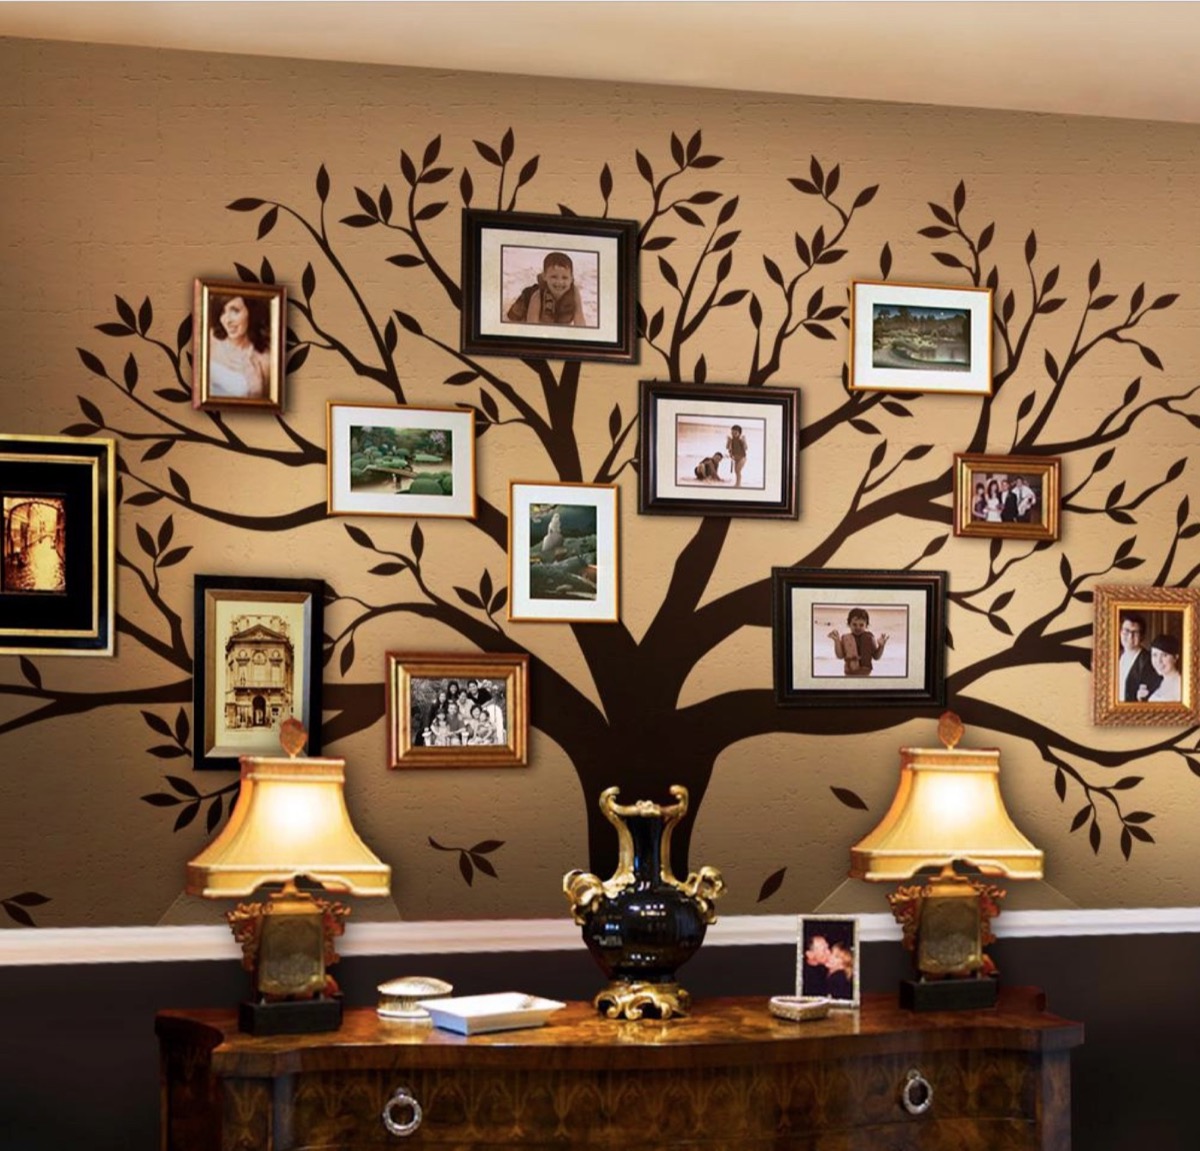 living room scene with large tree decal on wall with frames on it, best gifts for grandparents